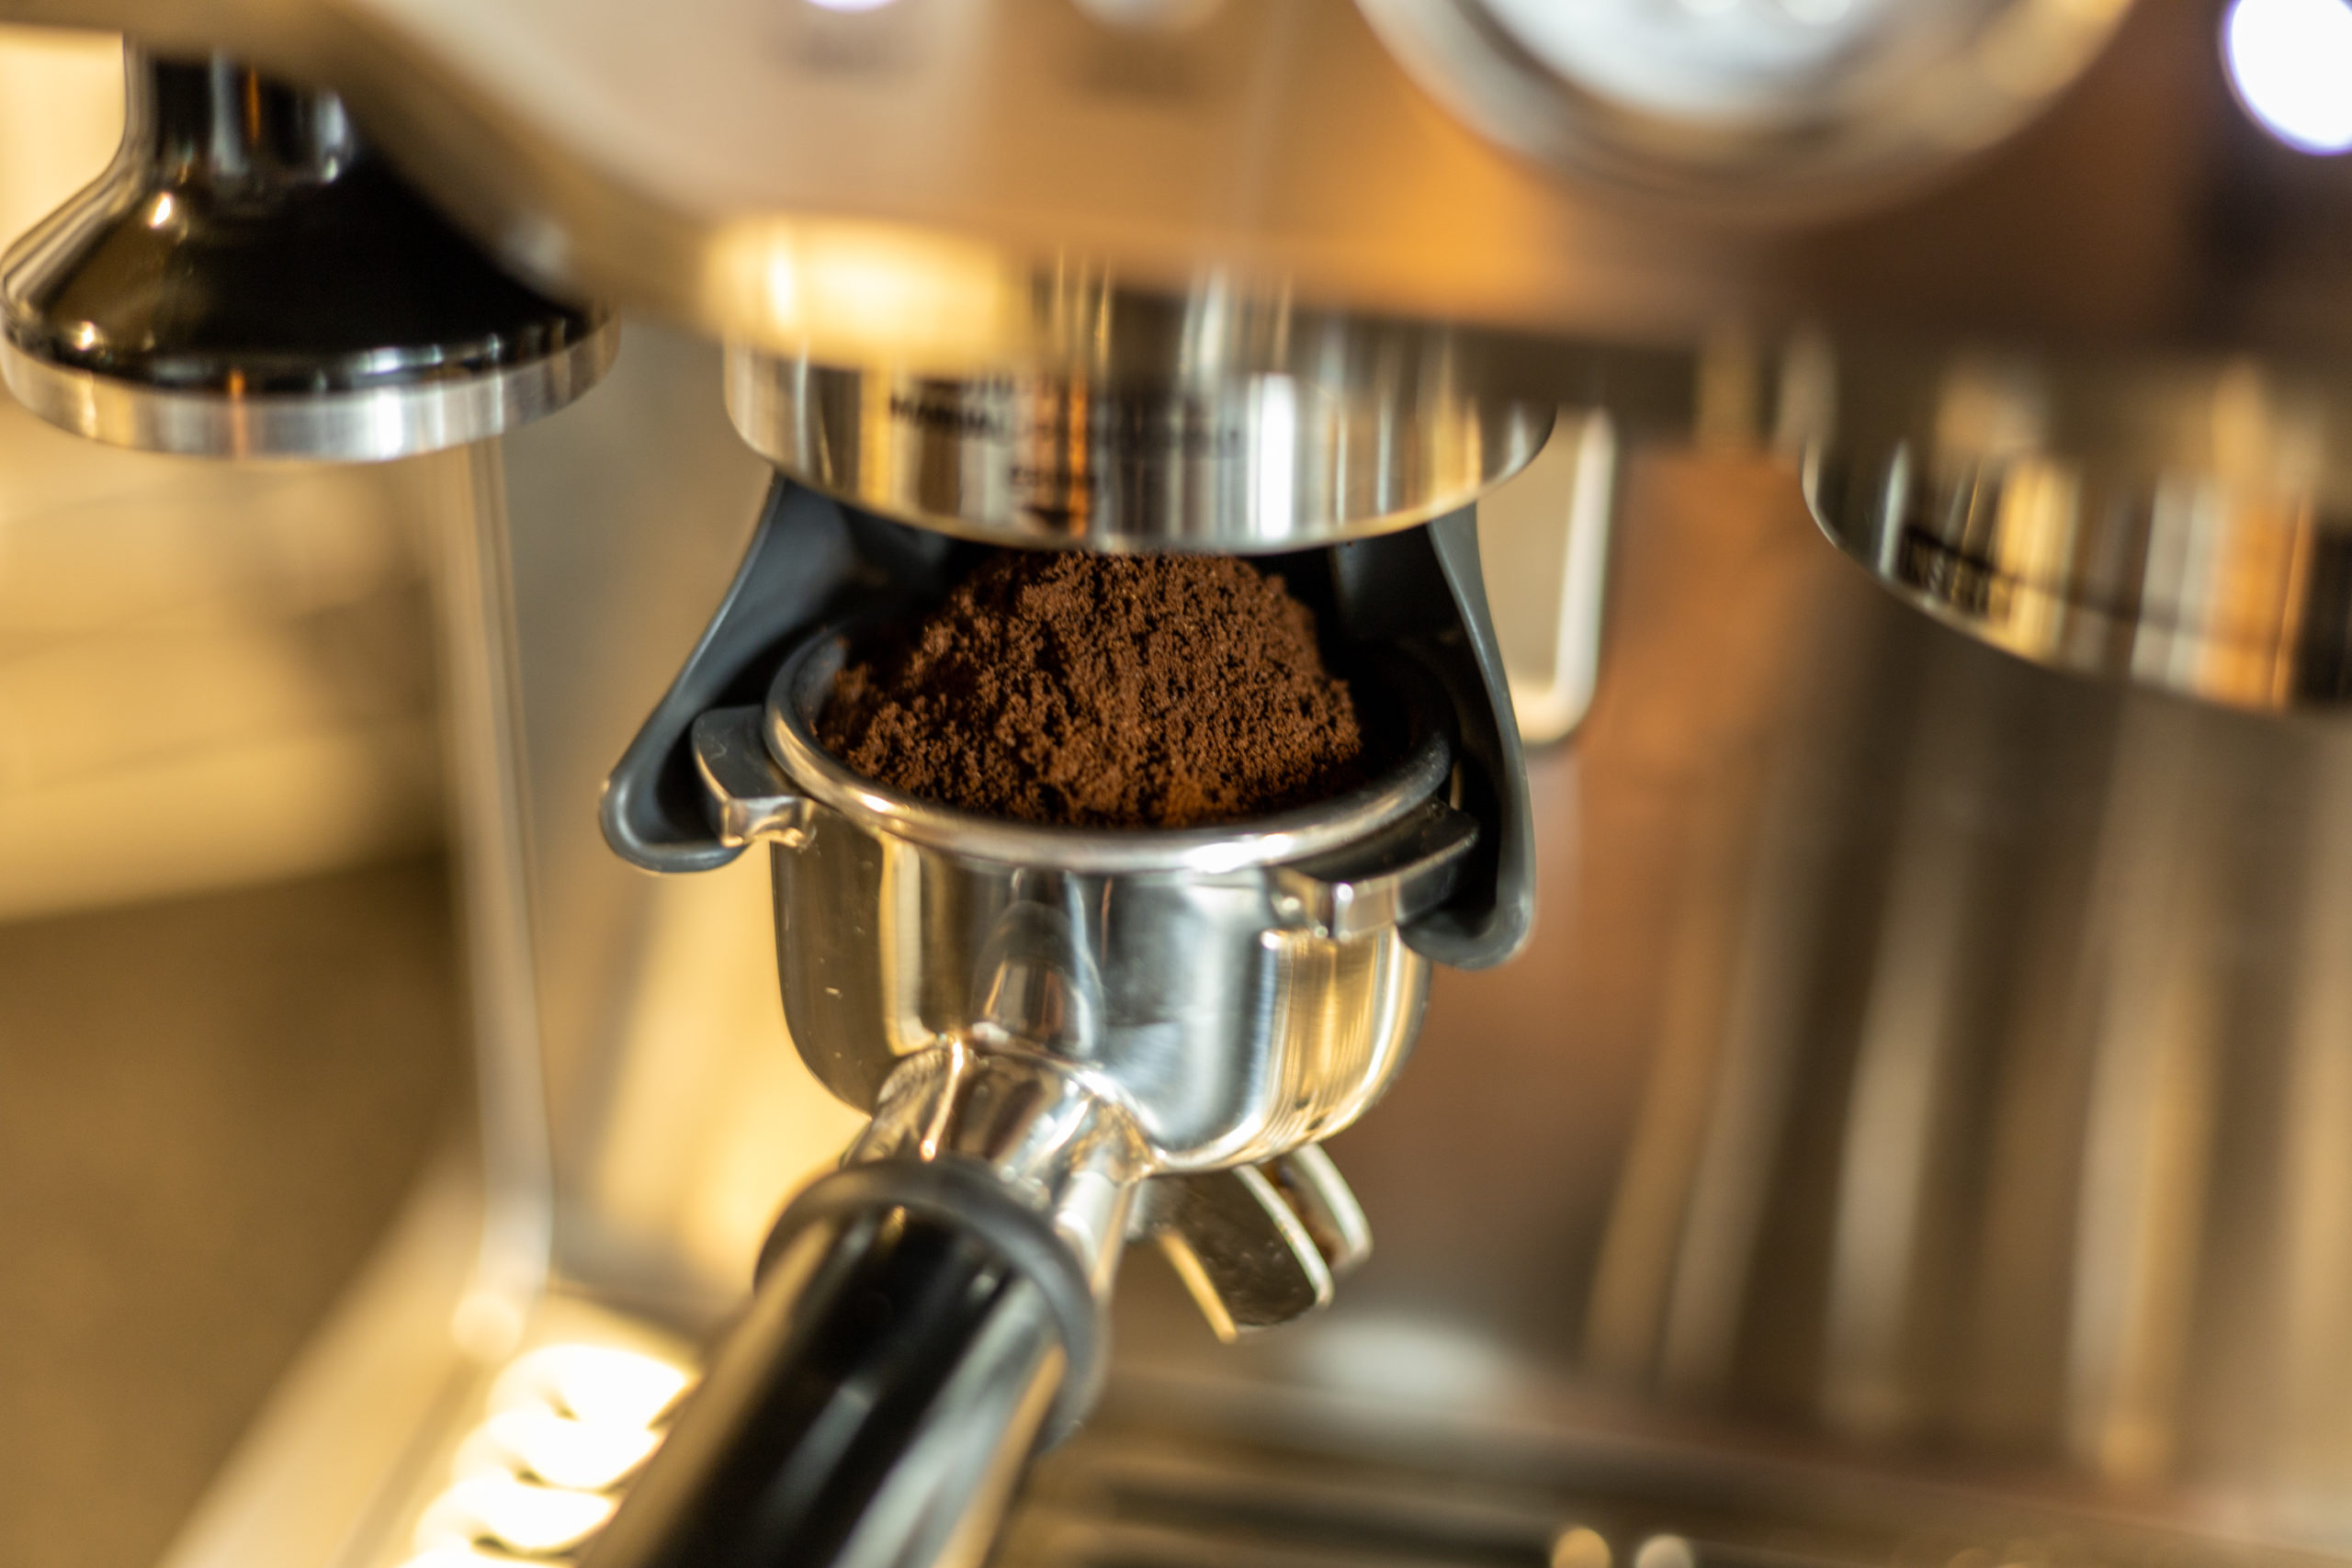 The Top Three Single Dose Espresso Grinders for Home